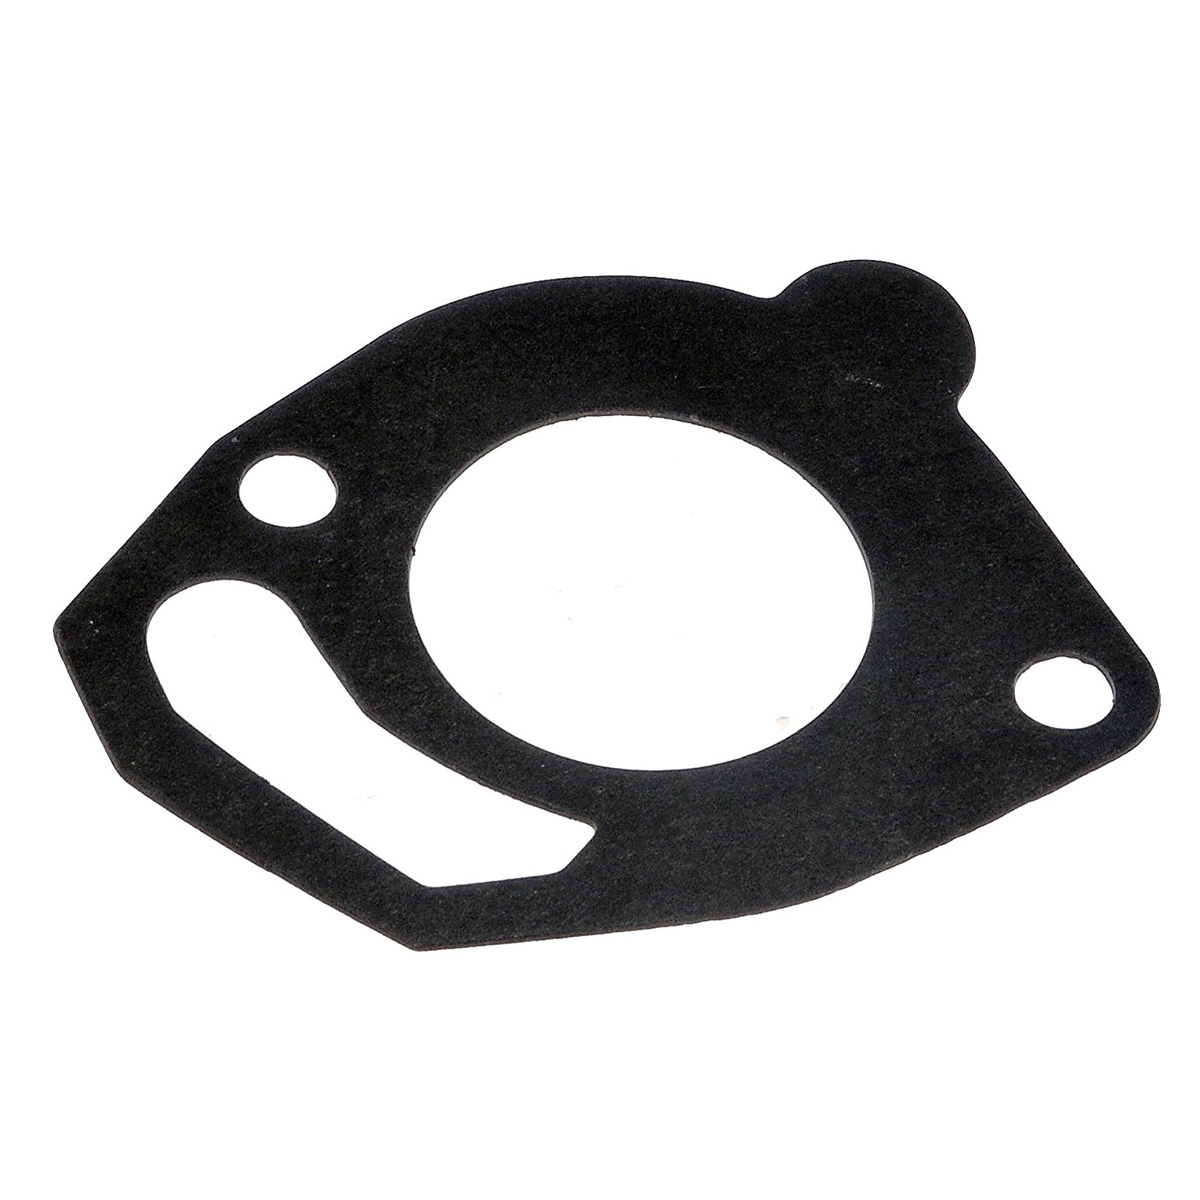 VAUXHALL AND OPEL BRAVA Thermostat Gasket